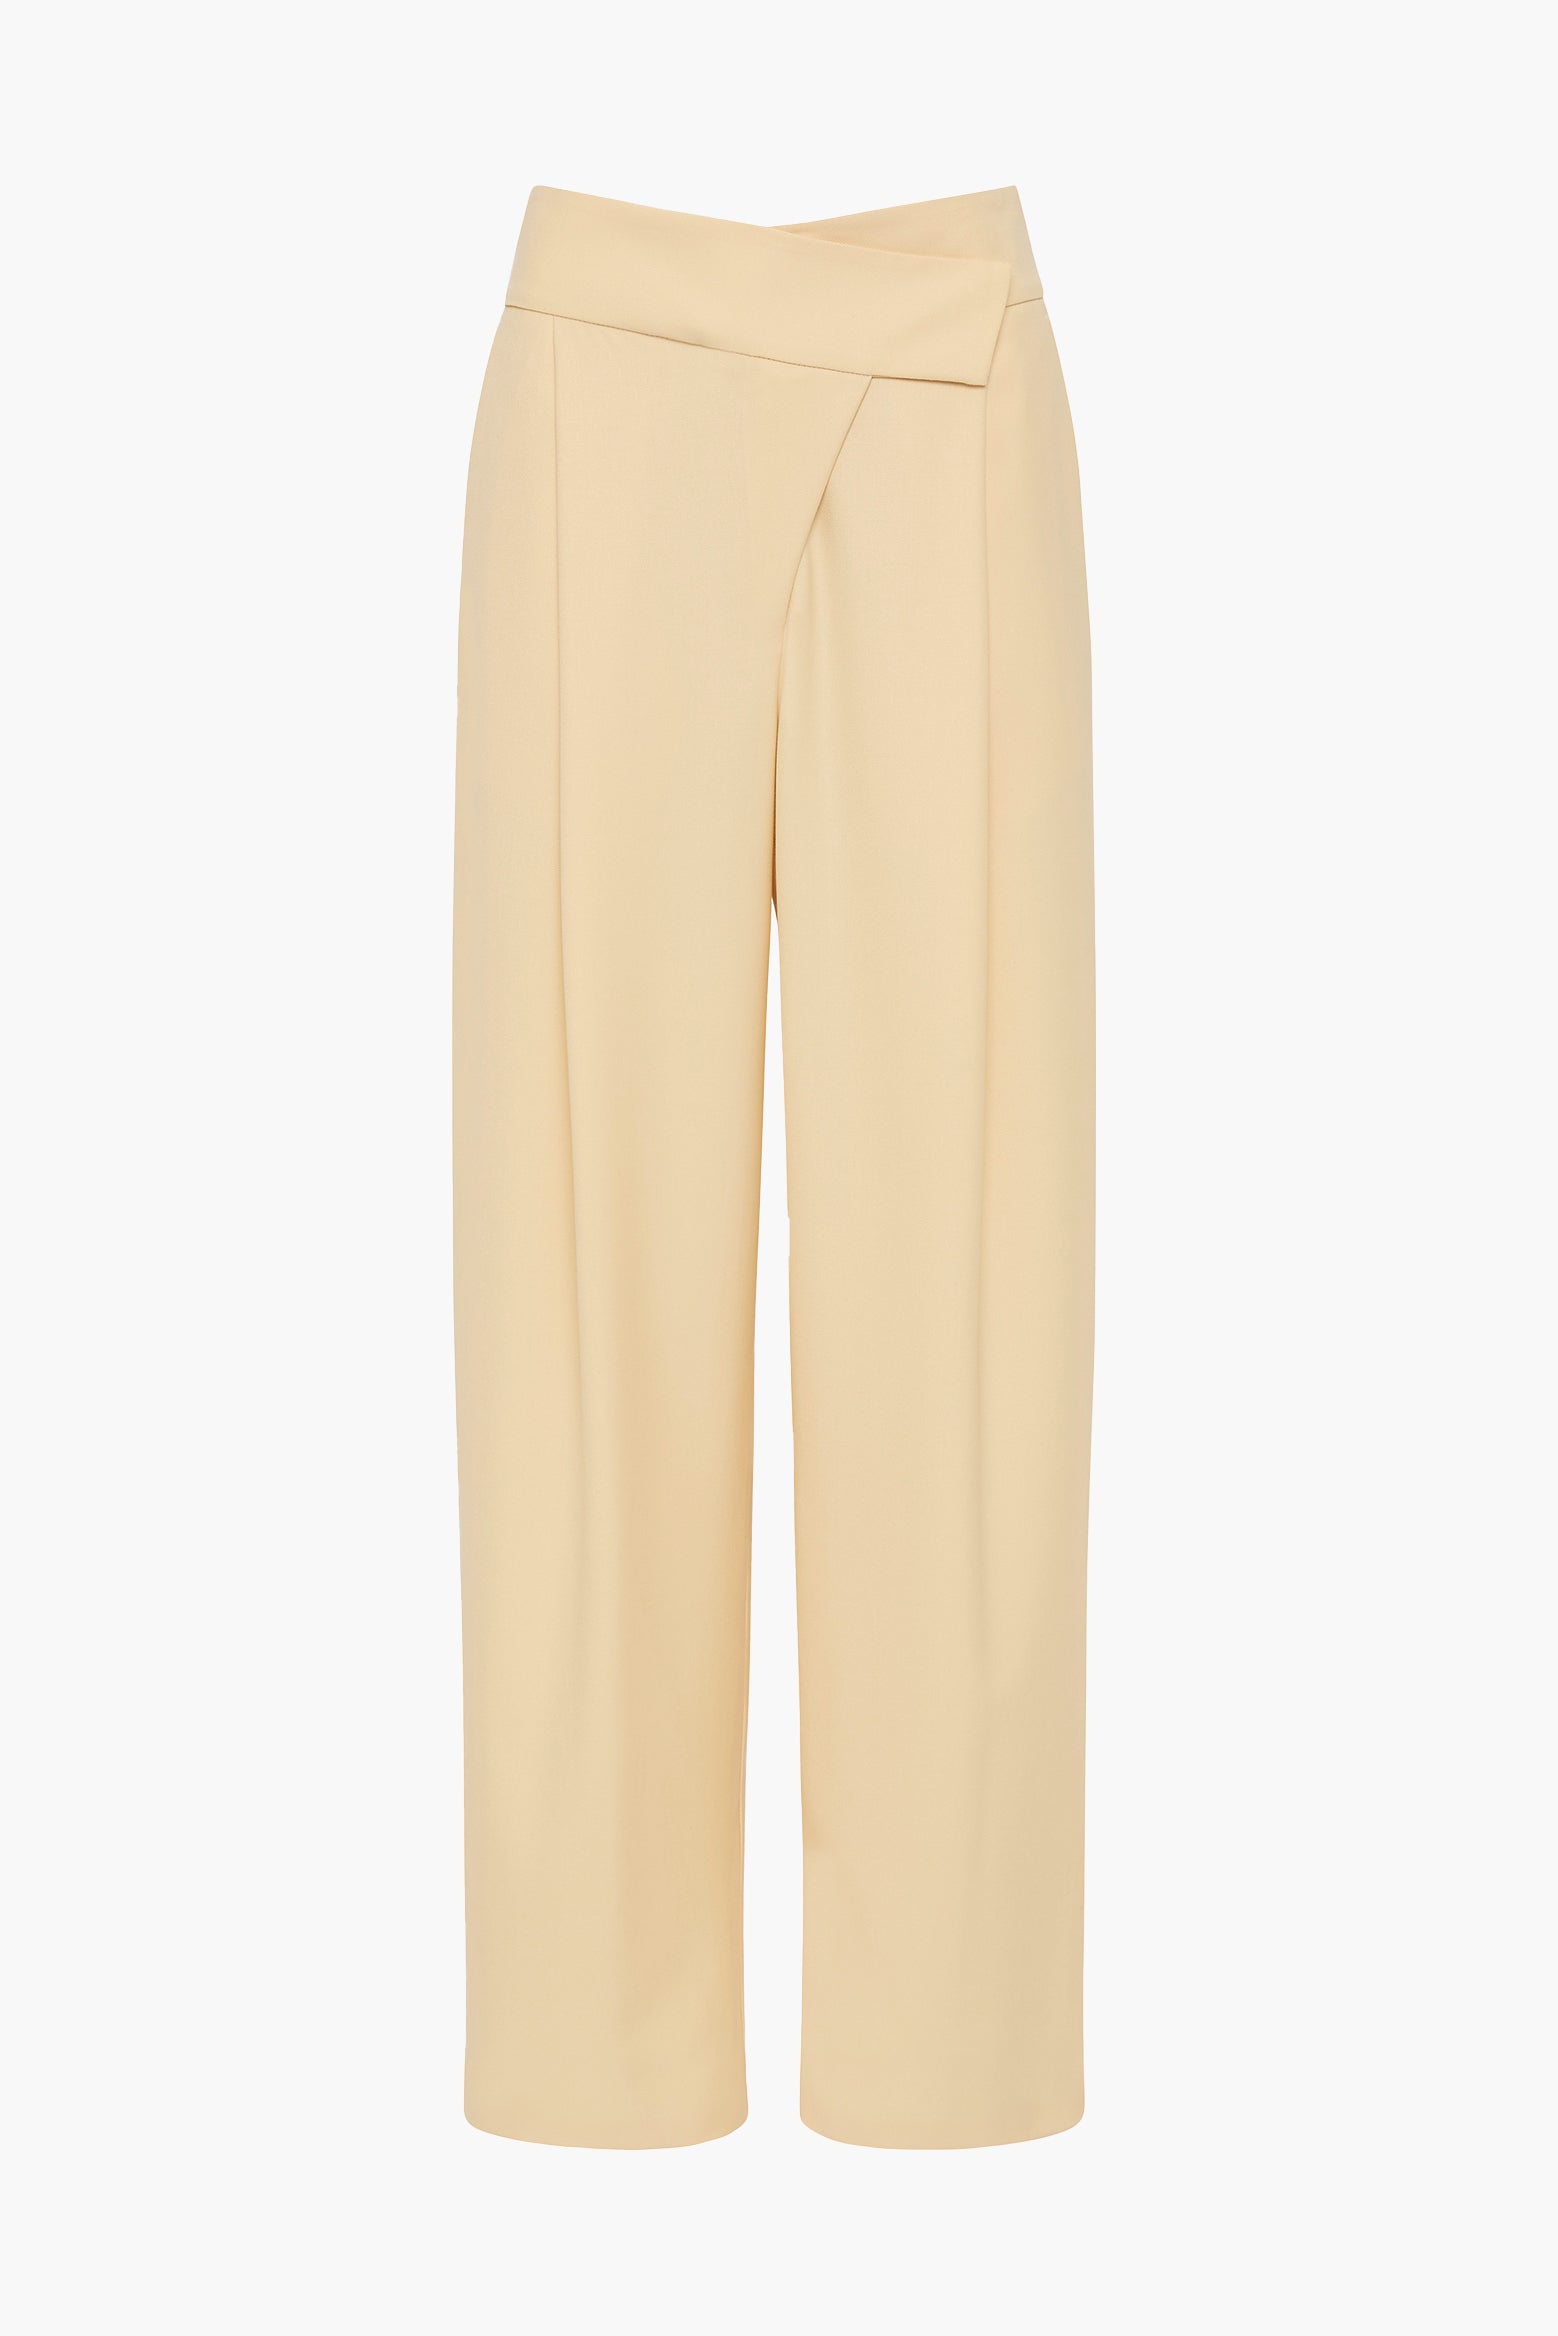 Esse Delphi Tailored Trouser in Butter available at The New Trend Australia.